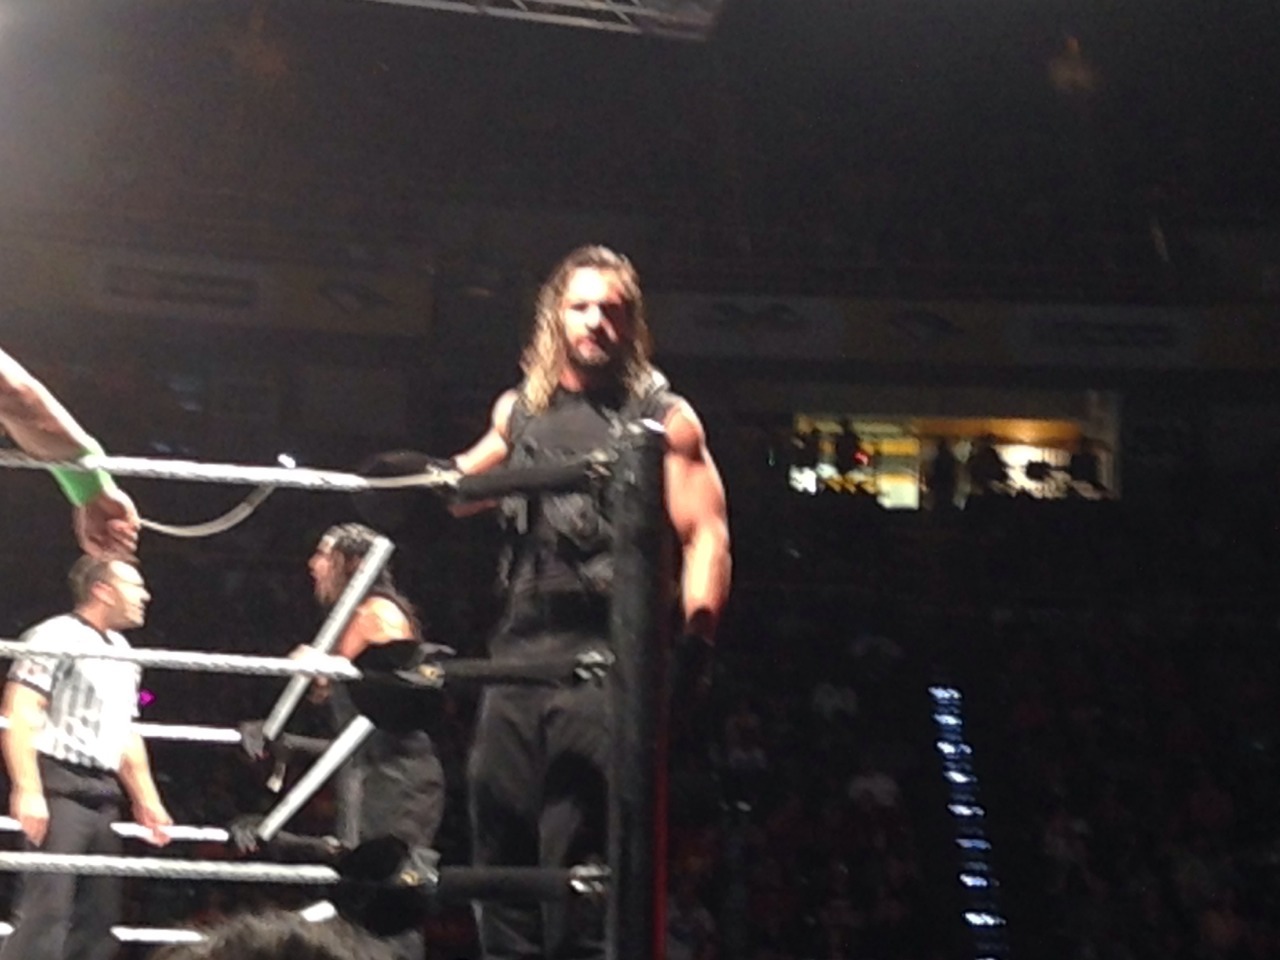 Seth Rollins posing for my camera tonight in Chattanooga